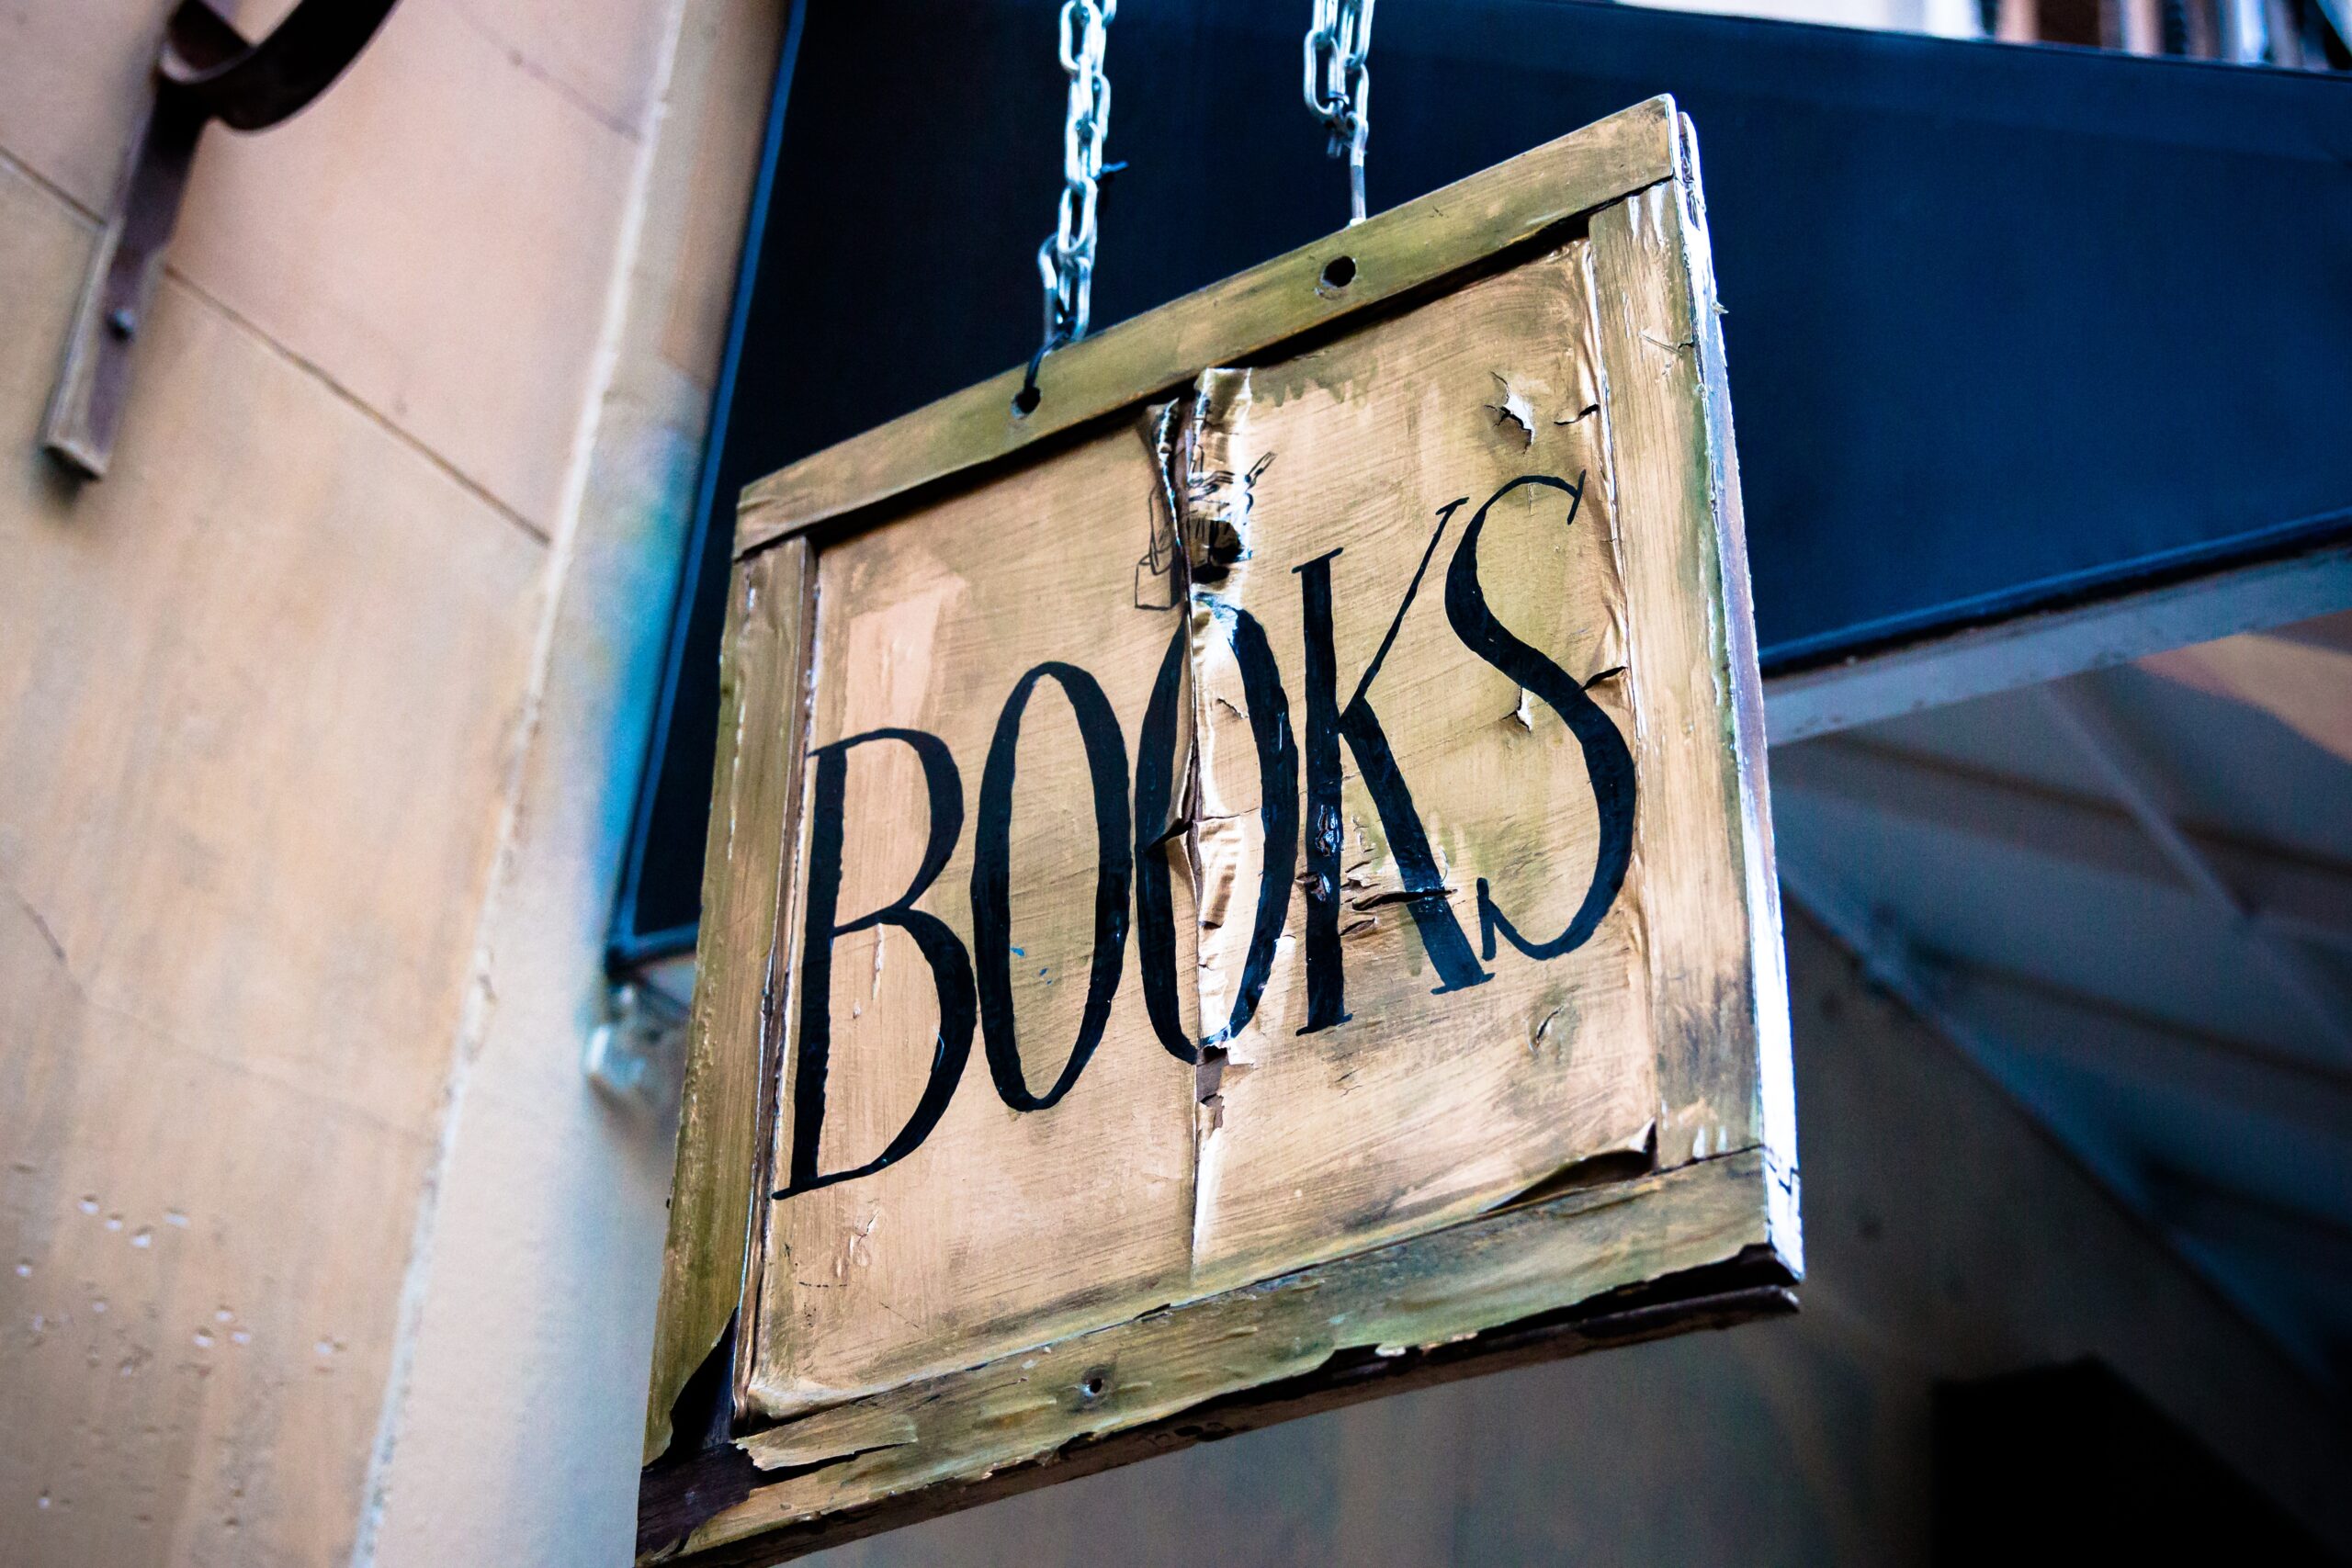 Self-publishing News: Booksellers Square Up To Amazon (Again)